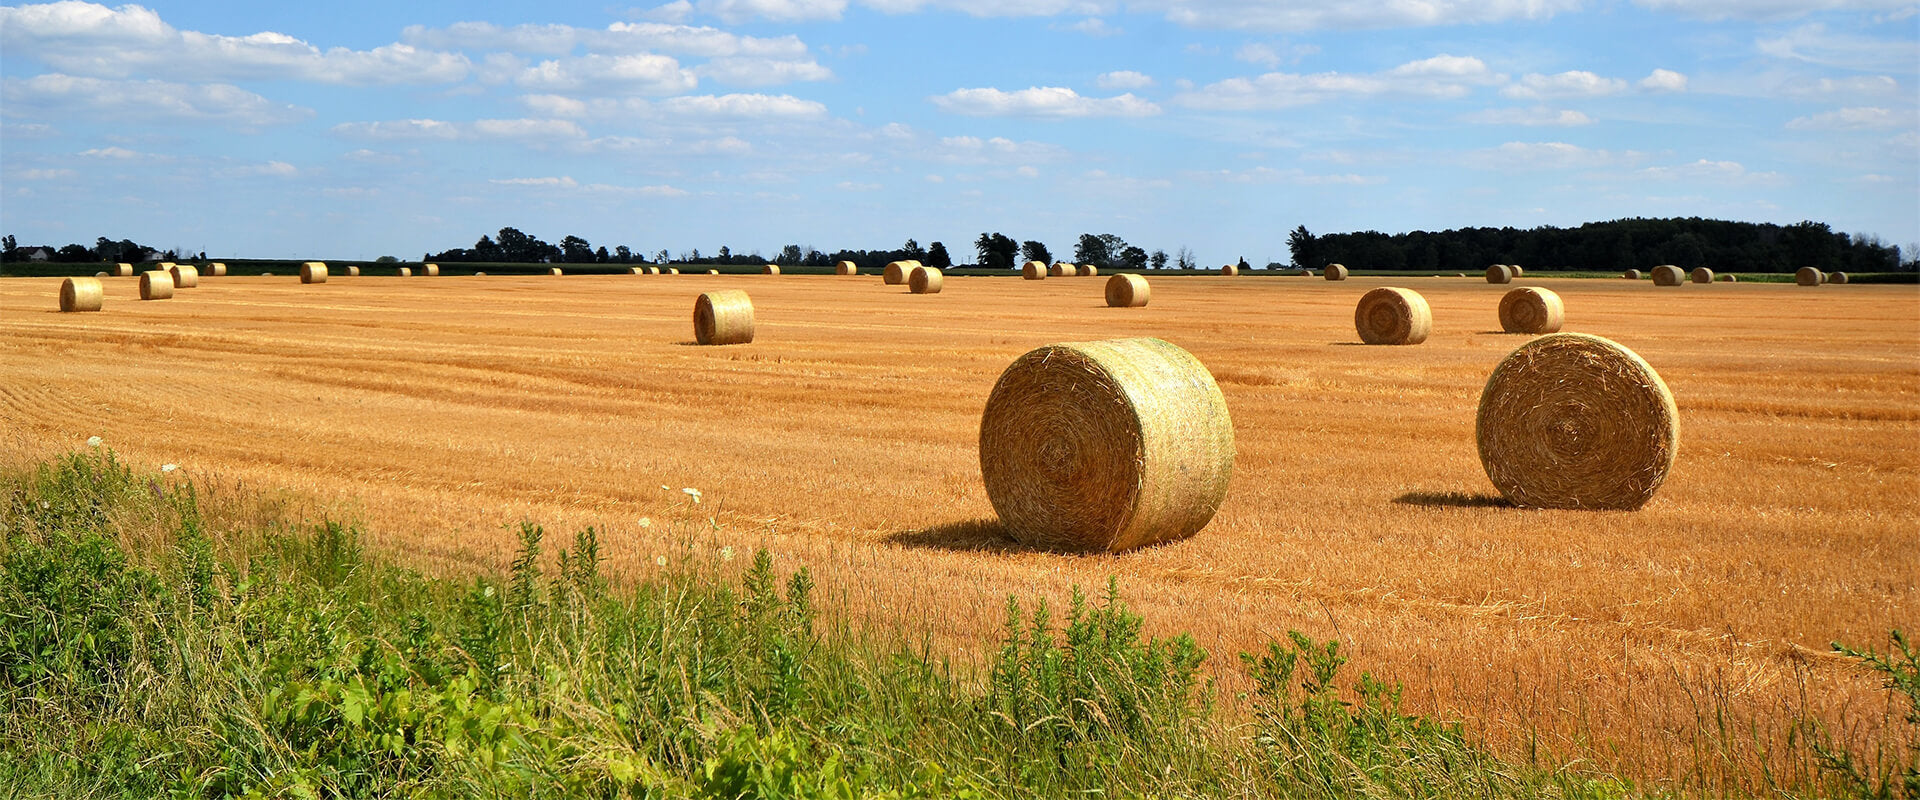 Bales of hay in a field with blue sky